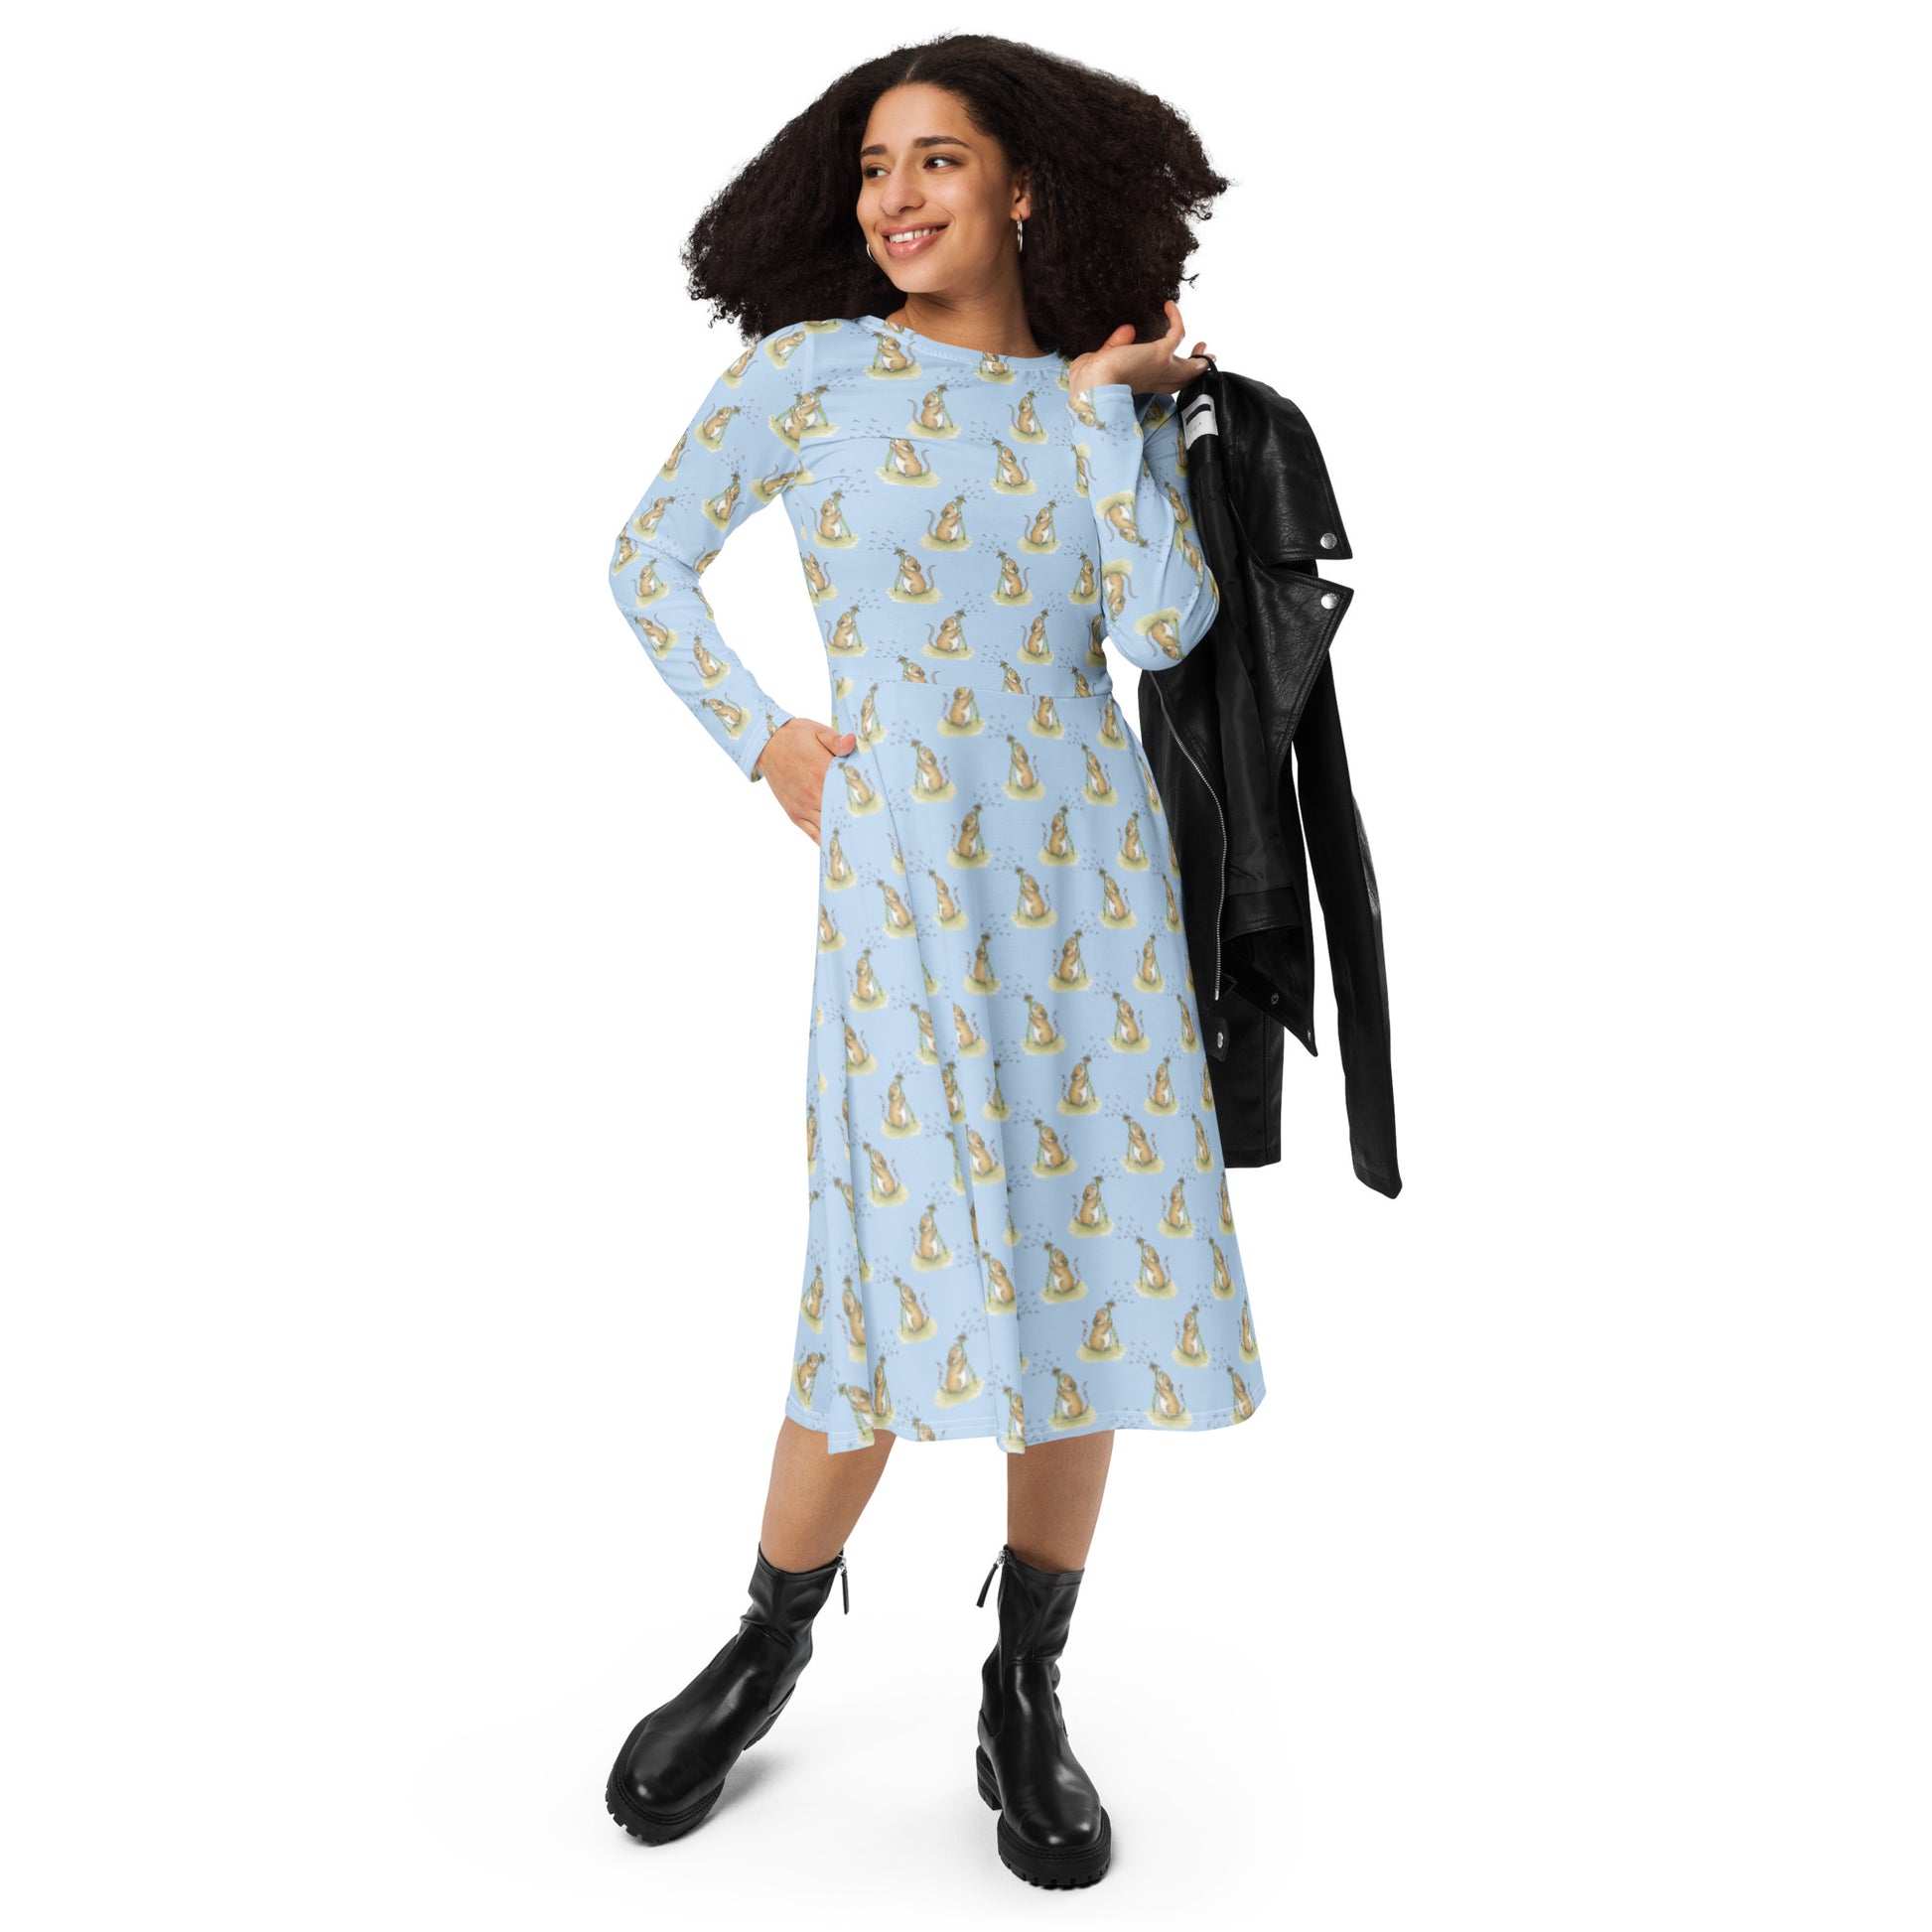 Dandelion Wish patterned long sleeve midi dress. Features patterned design of a mouse making a wish on a dandelion fluff against a light blue background. Dress has boat neckline, fitted waist, flared bottom, and side pockets.  Shown on female model with black jacket over her shoulder.